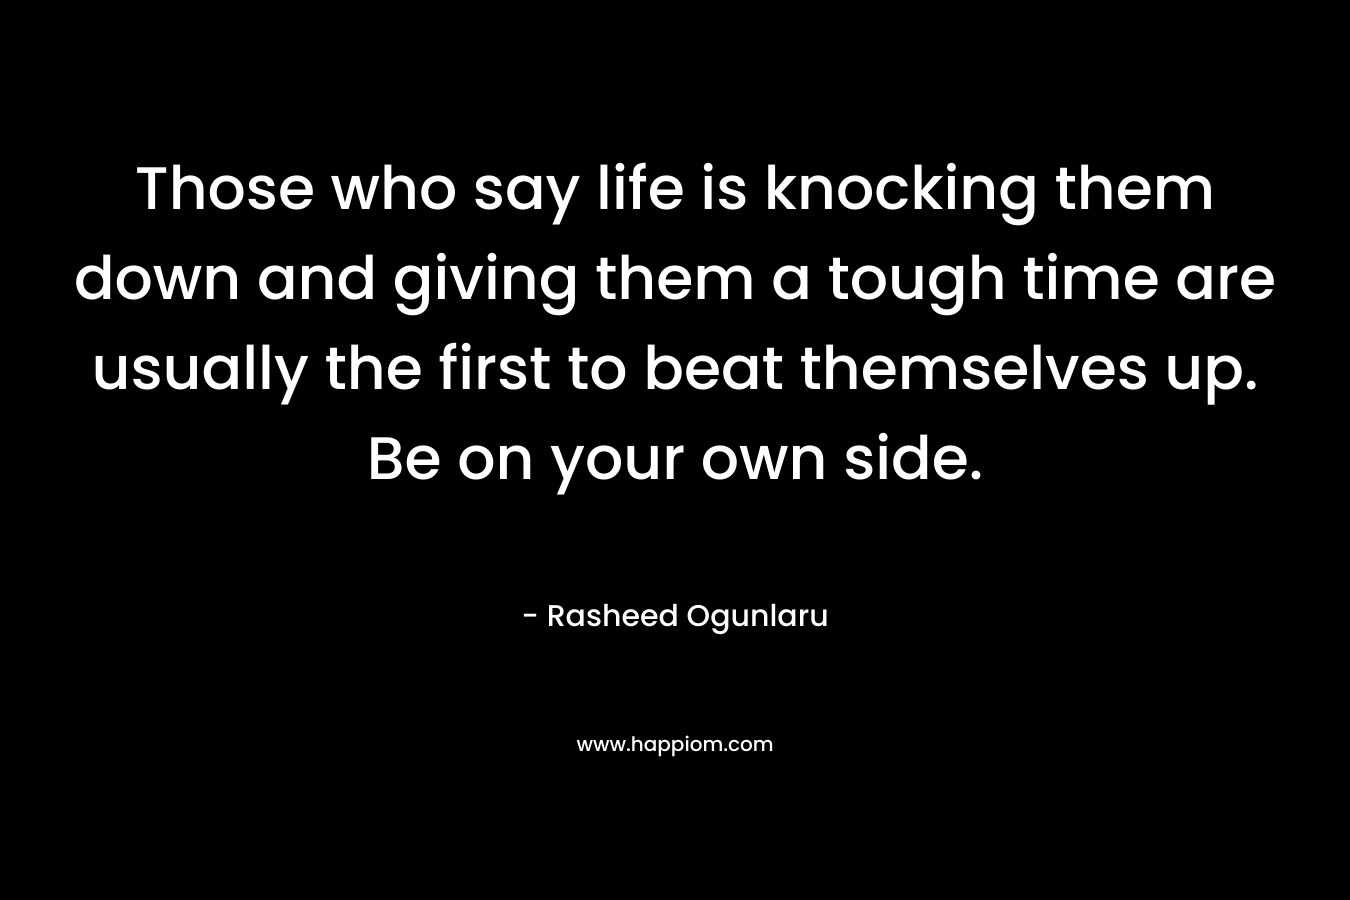 Those who say life is knocking them down and giving them a tough time are usually the first to beat themselves up. Be on your own side.